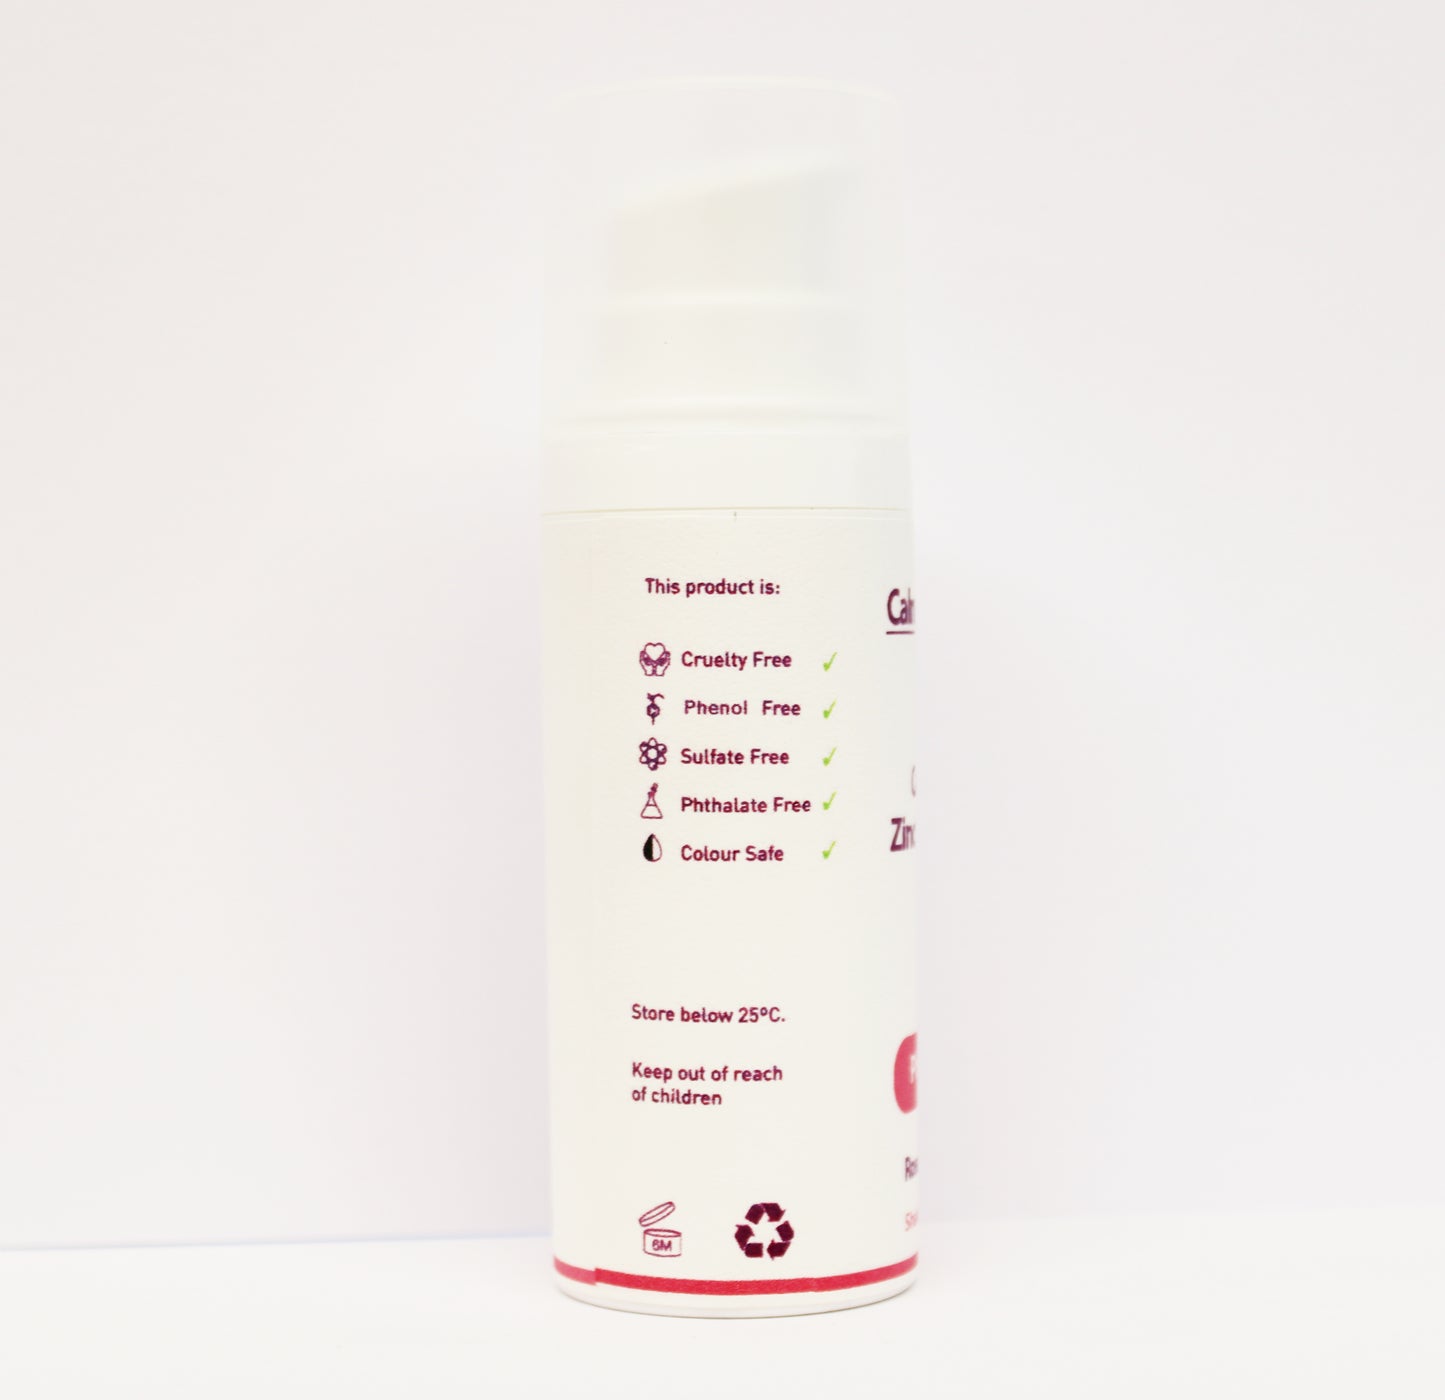 Calamine and Zinc Oxide Lotion 50ml | Phenol Free Calamine lotion for irritated itchy skin